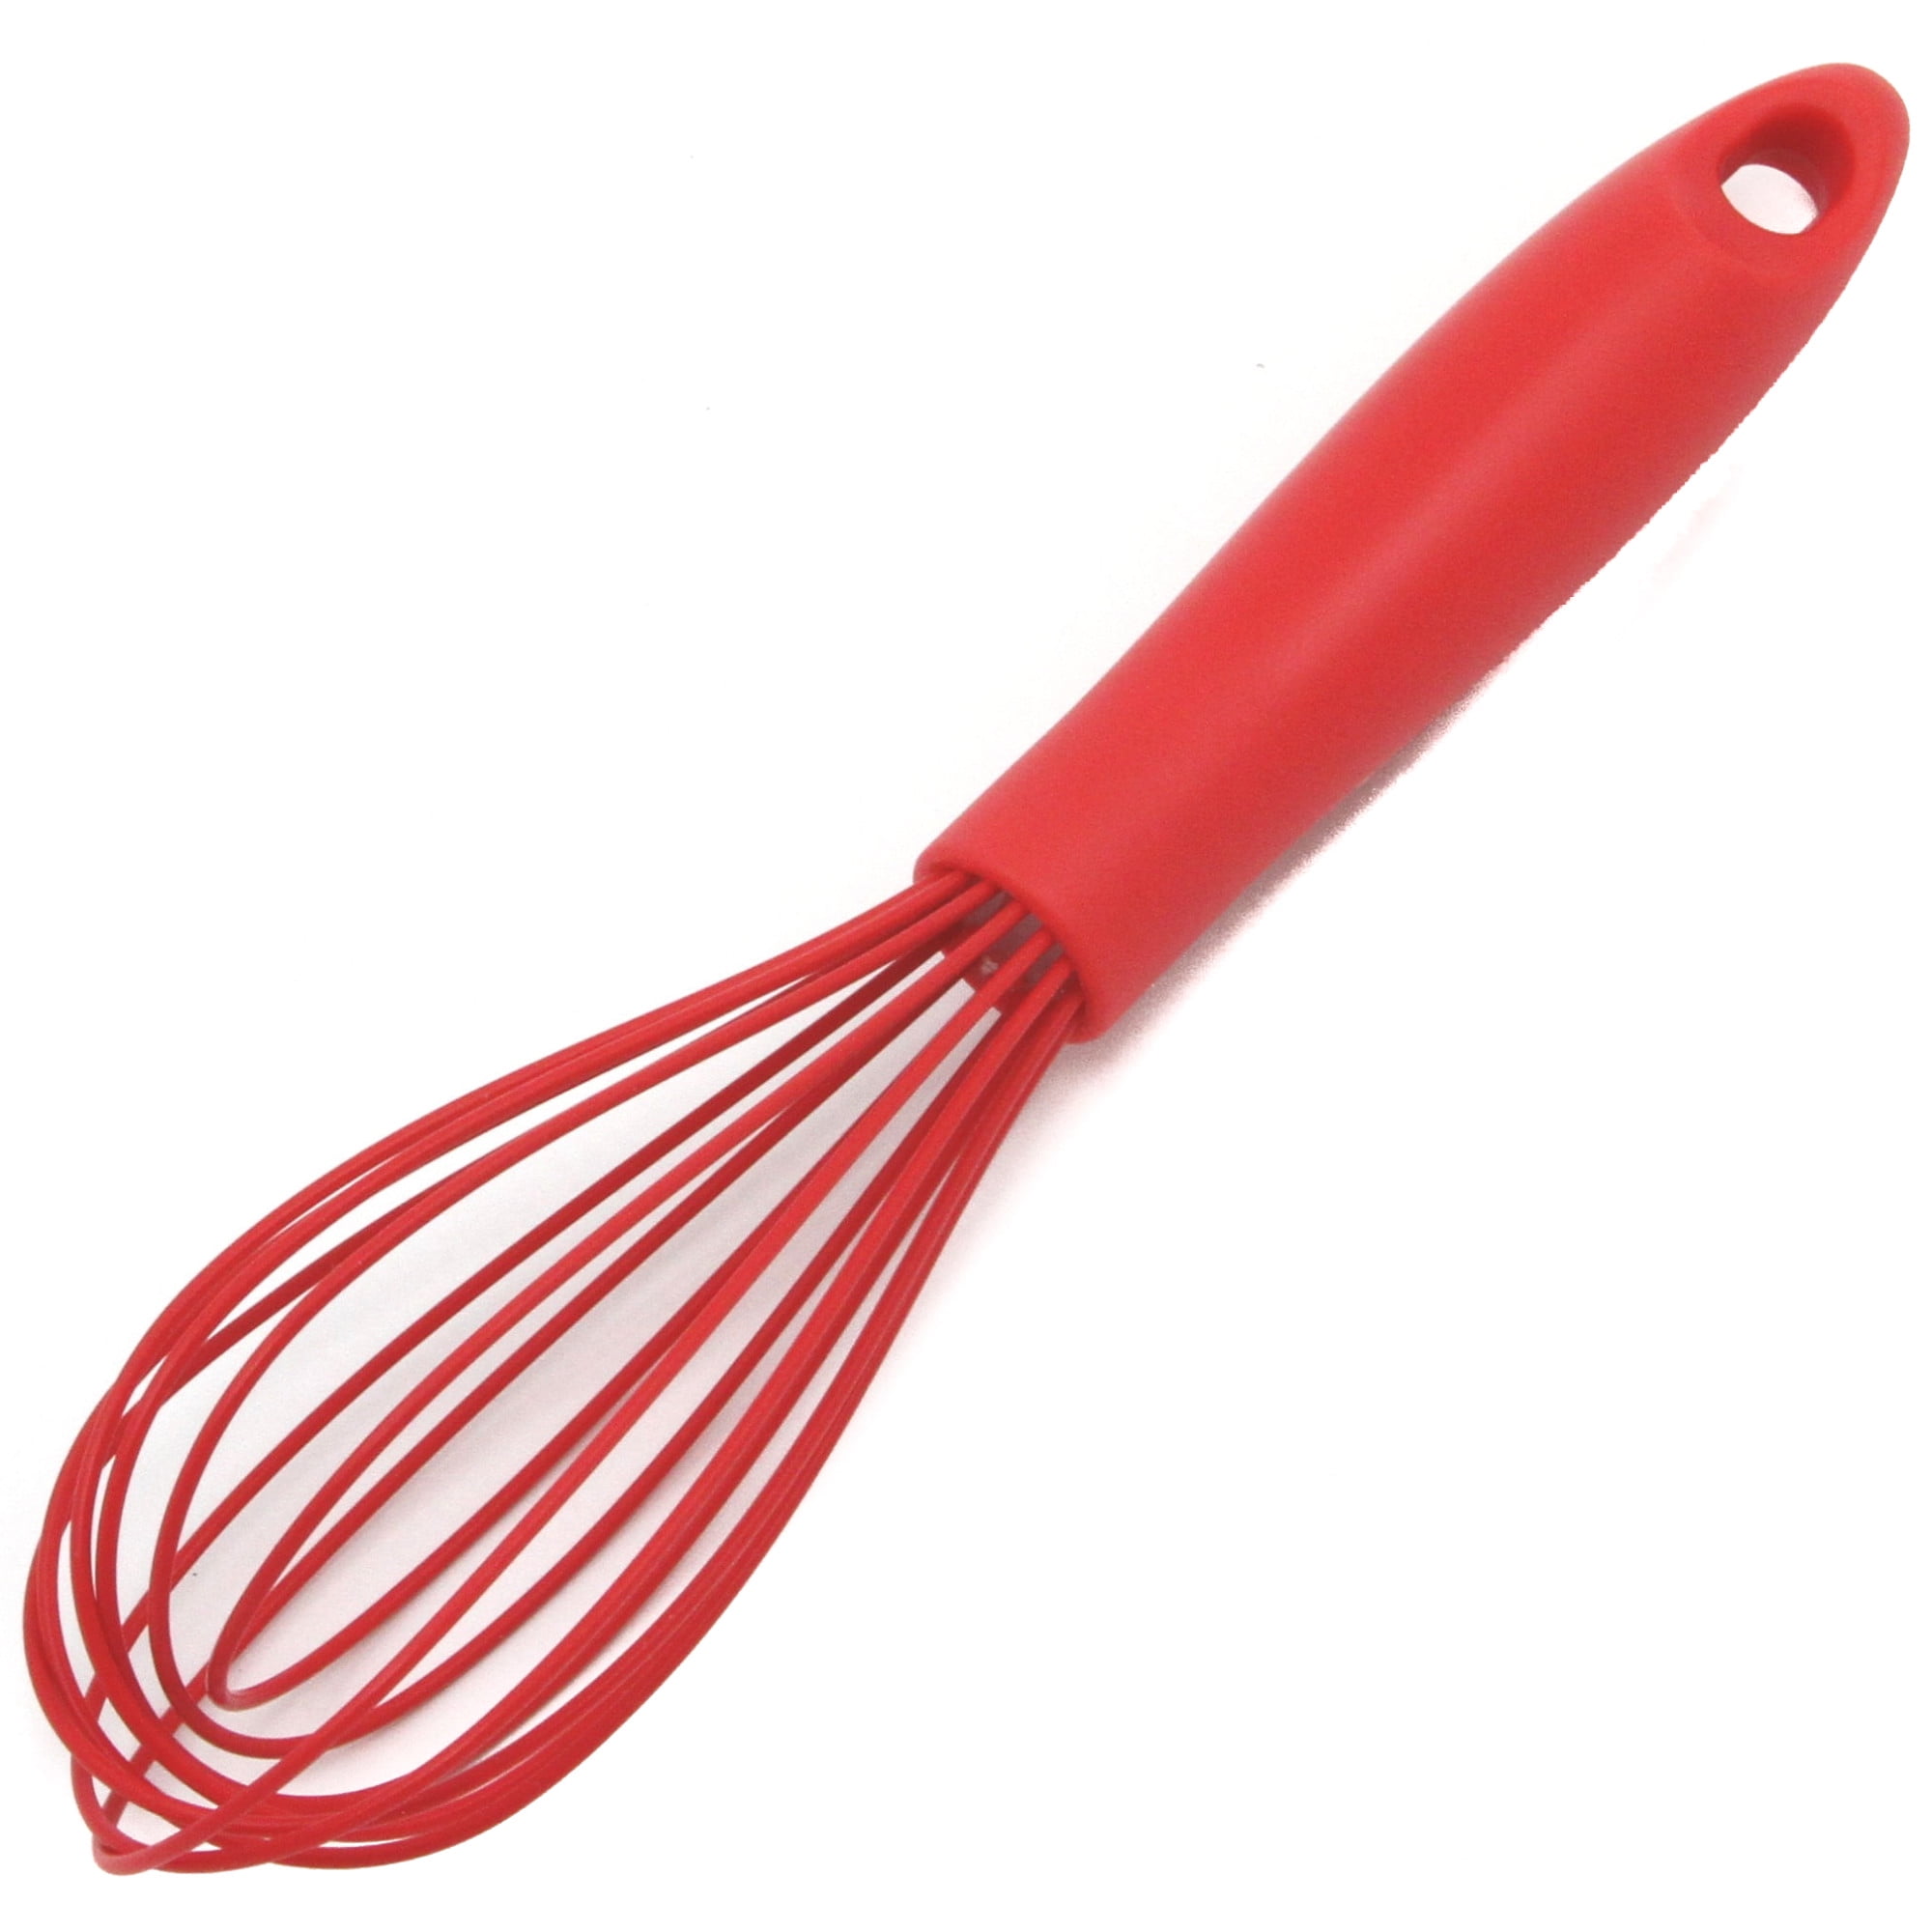 Whisk Wiper - Wipe A Whisk Easily - Multipurpose Kitchen Tool, Made in USA - Includes 11 inch Stainless-Steel Whisk (Color: Red)